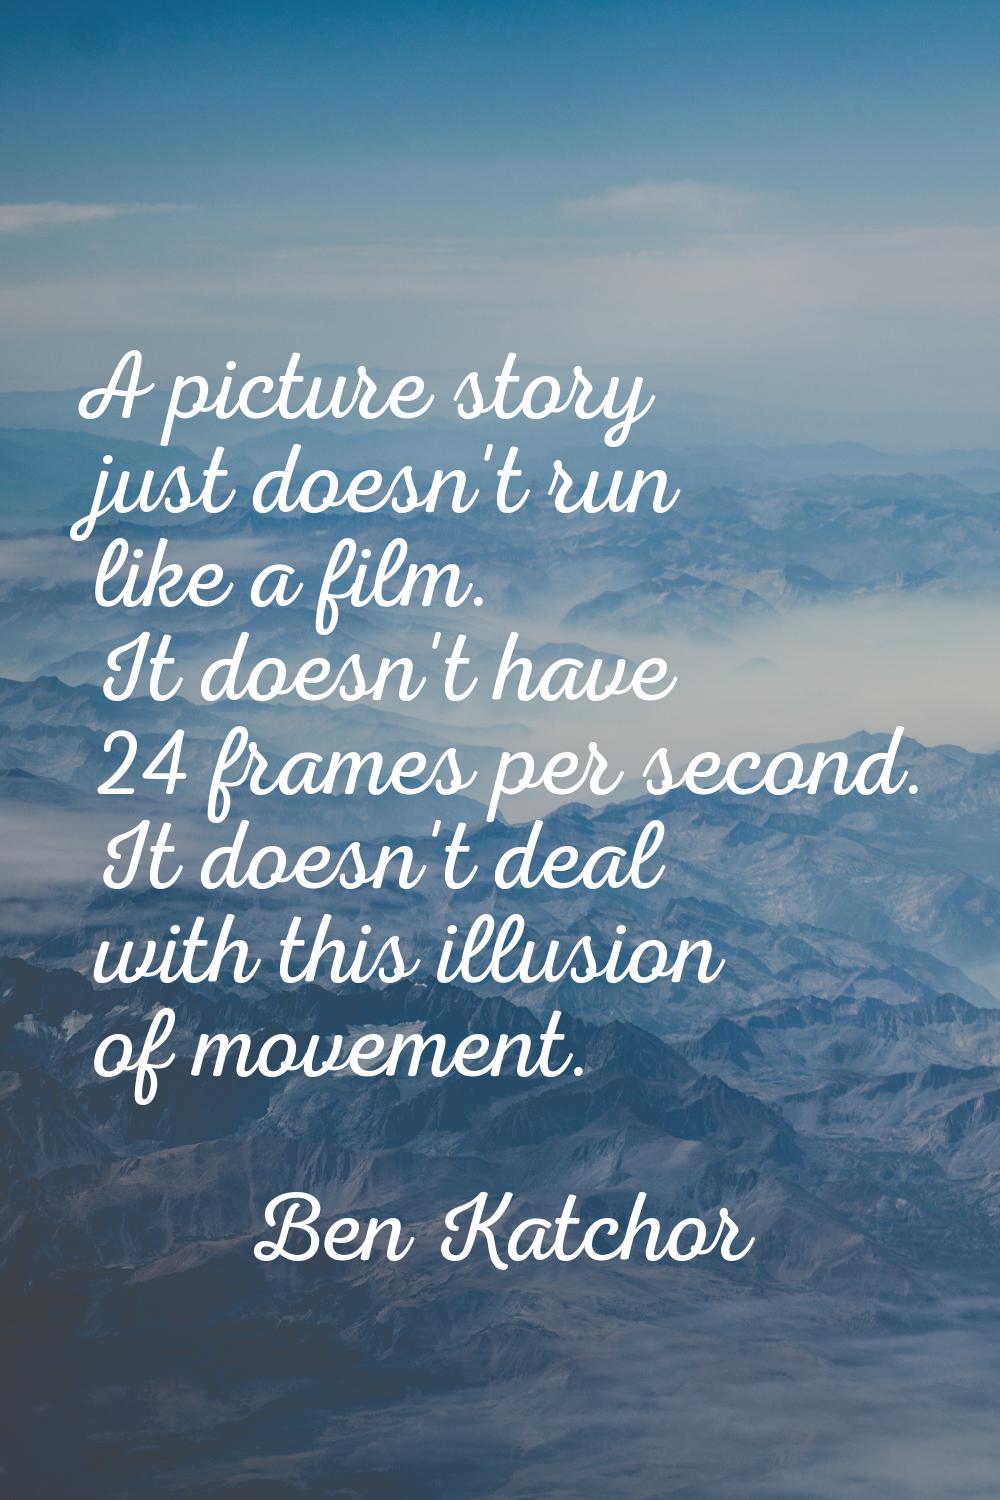 A picture story just doesn't run like a film. It doesn't have 24 frames per second. It doesn't deal